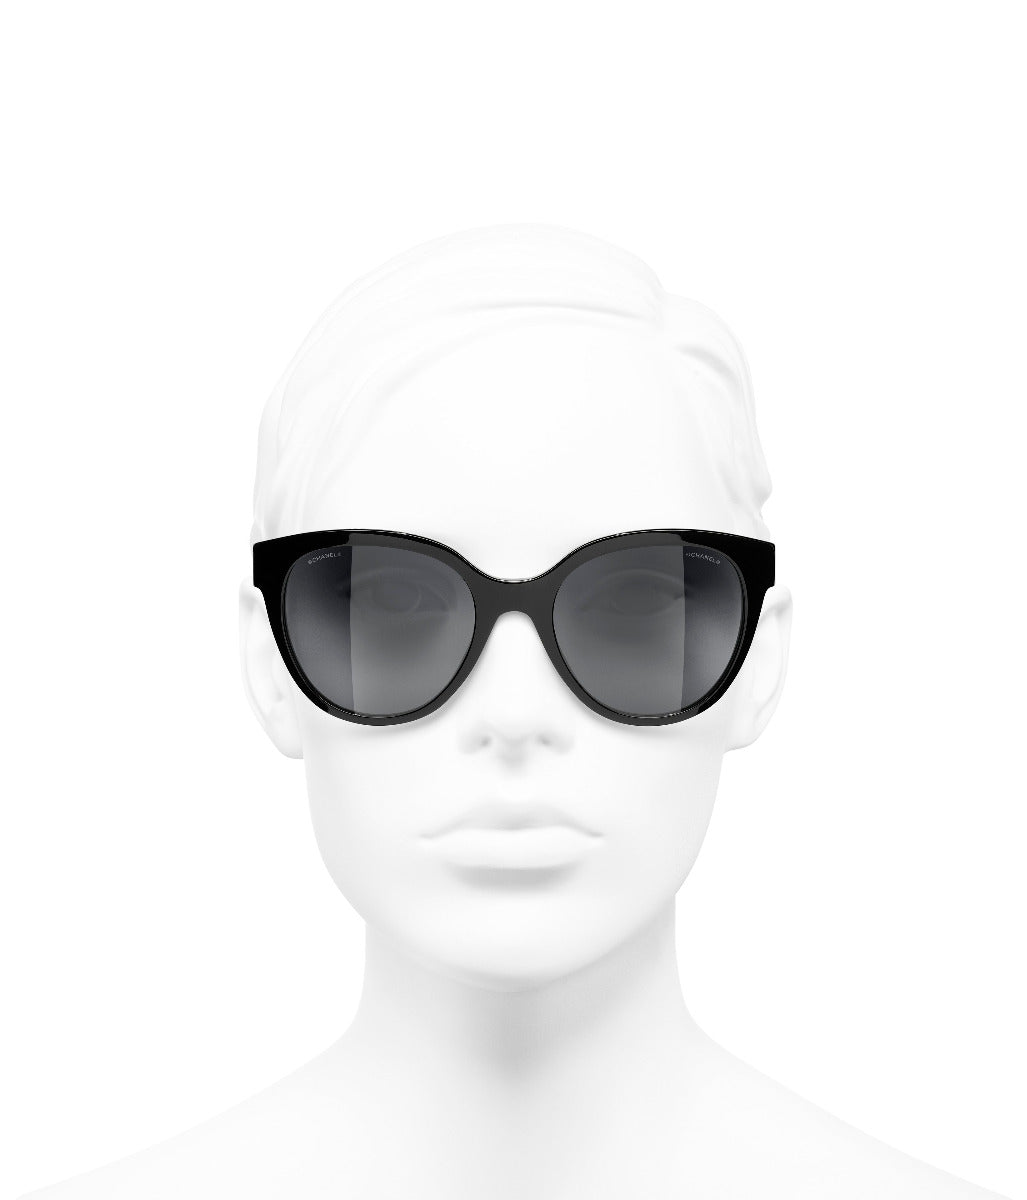 Chanel 5414 Butterfly Sunglasses Black - $400 (15% Off Retail